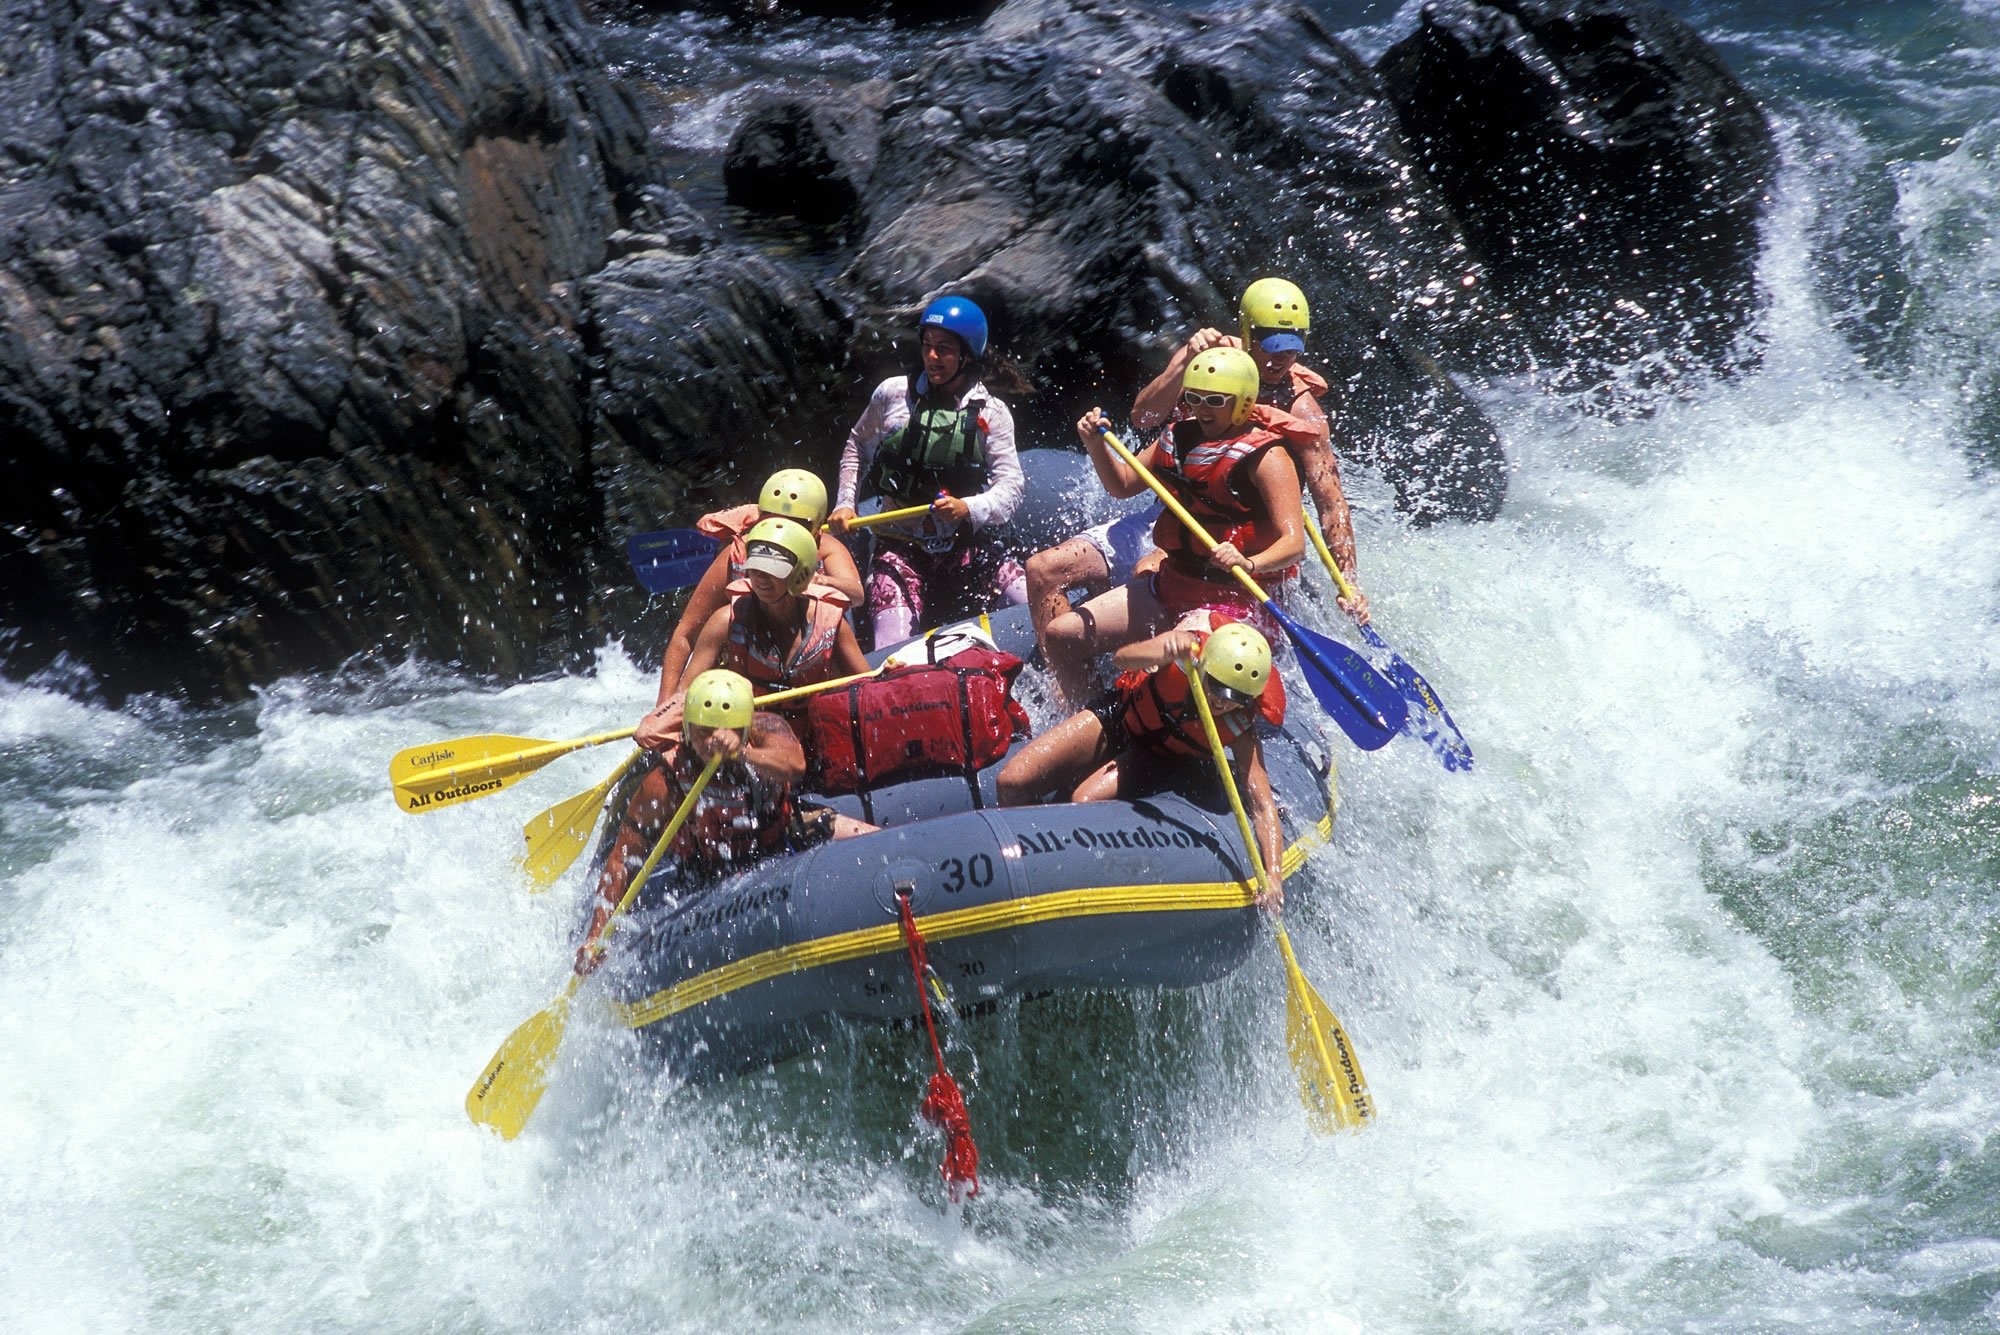 Extreme wallpapers, Rafting on water, Desktop and mobile backgrounds, Outdoor adventure, 2000x1340 HD Desktop